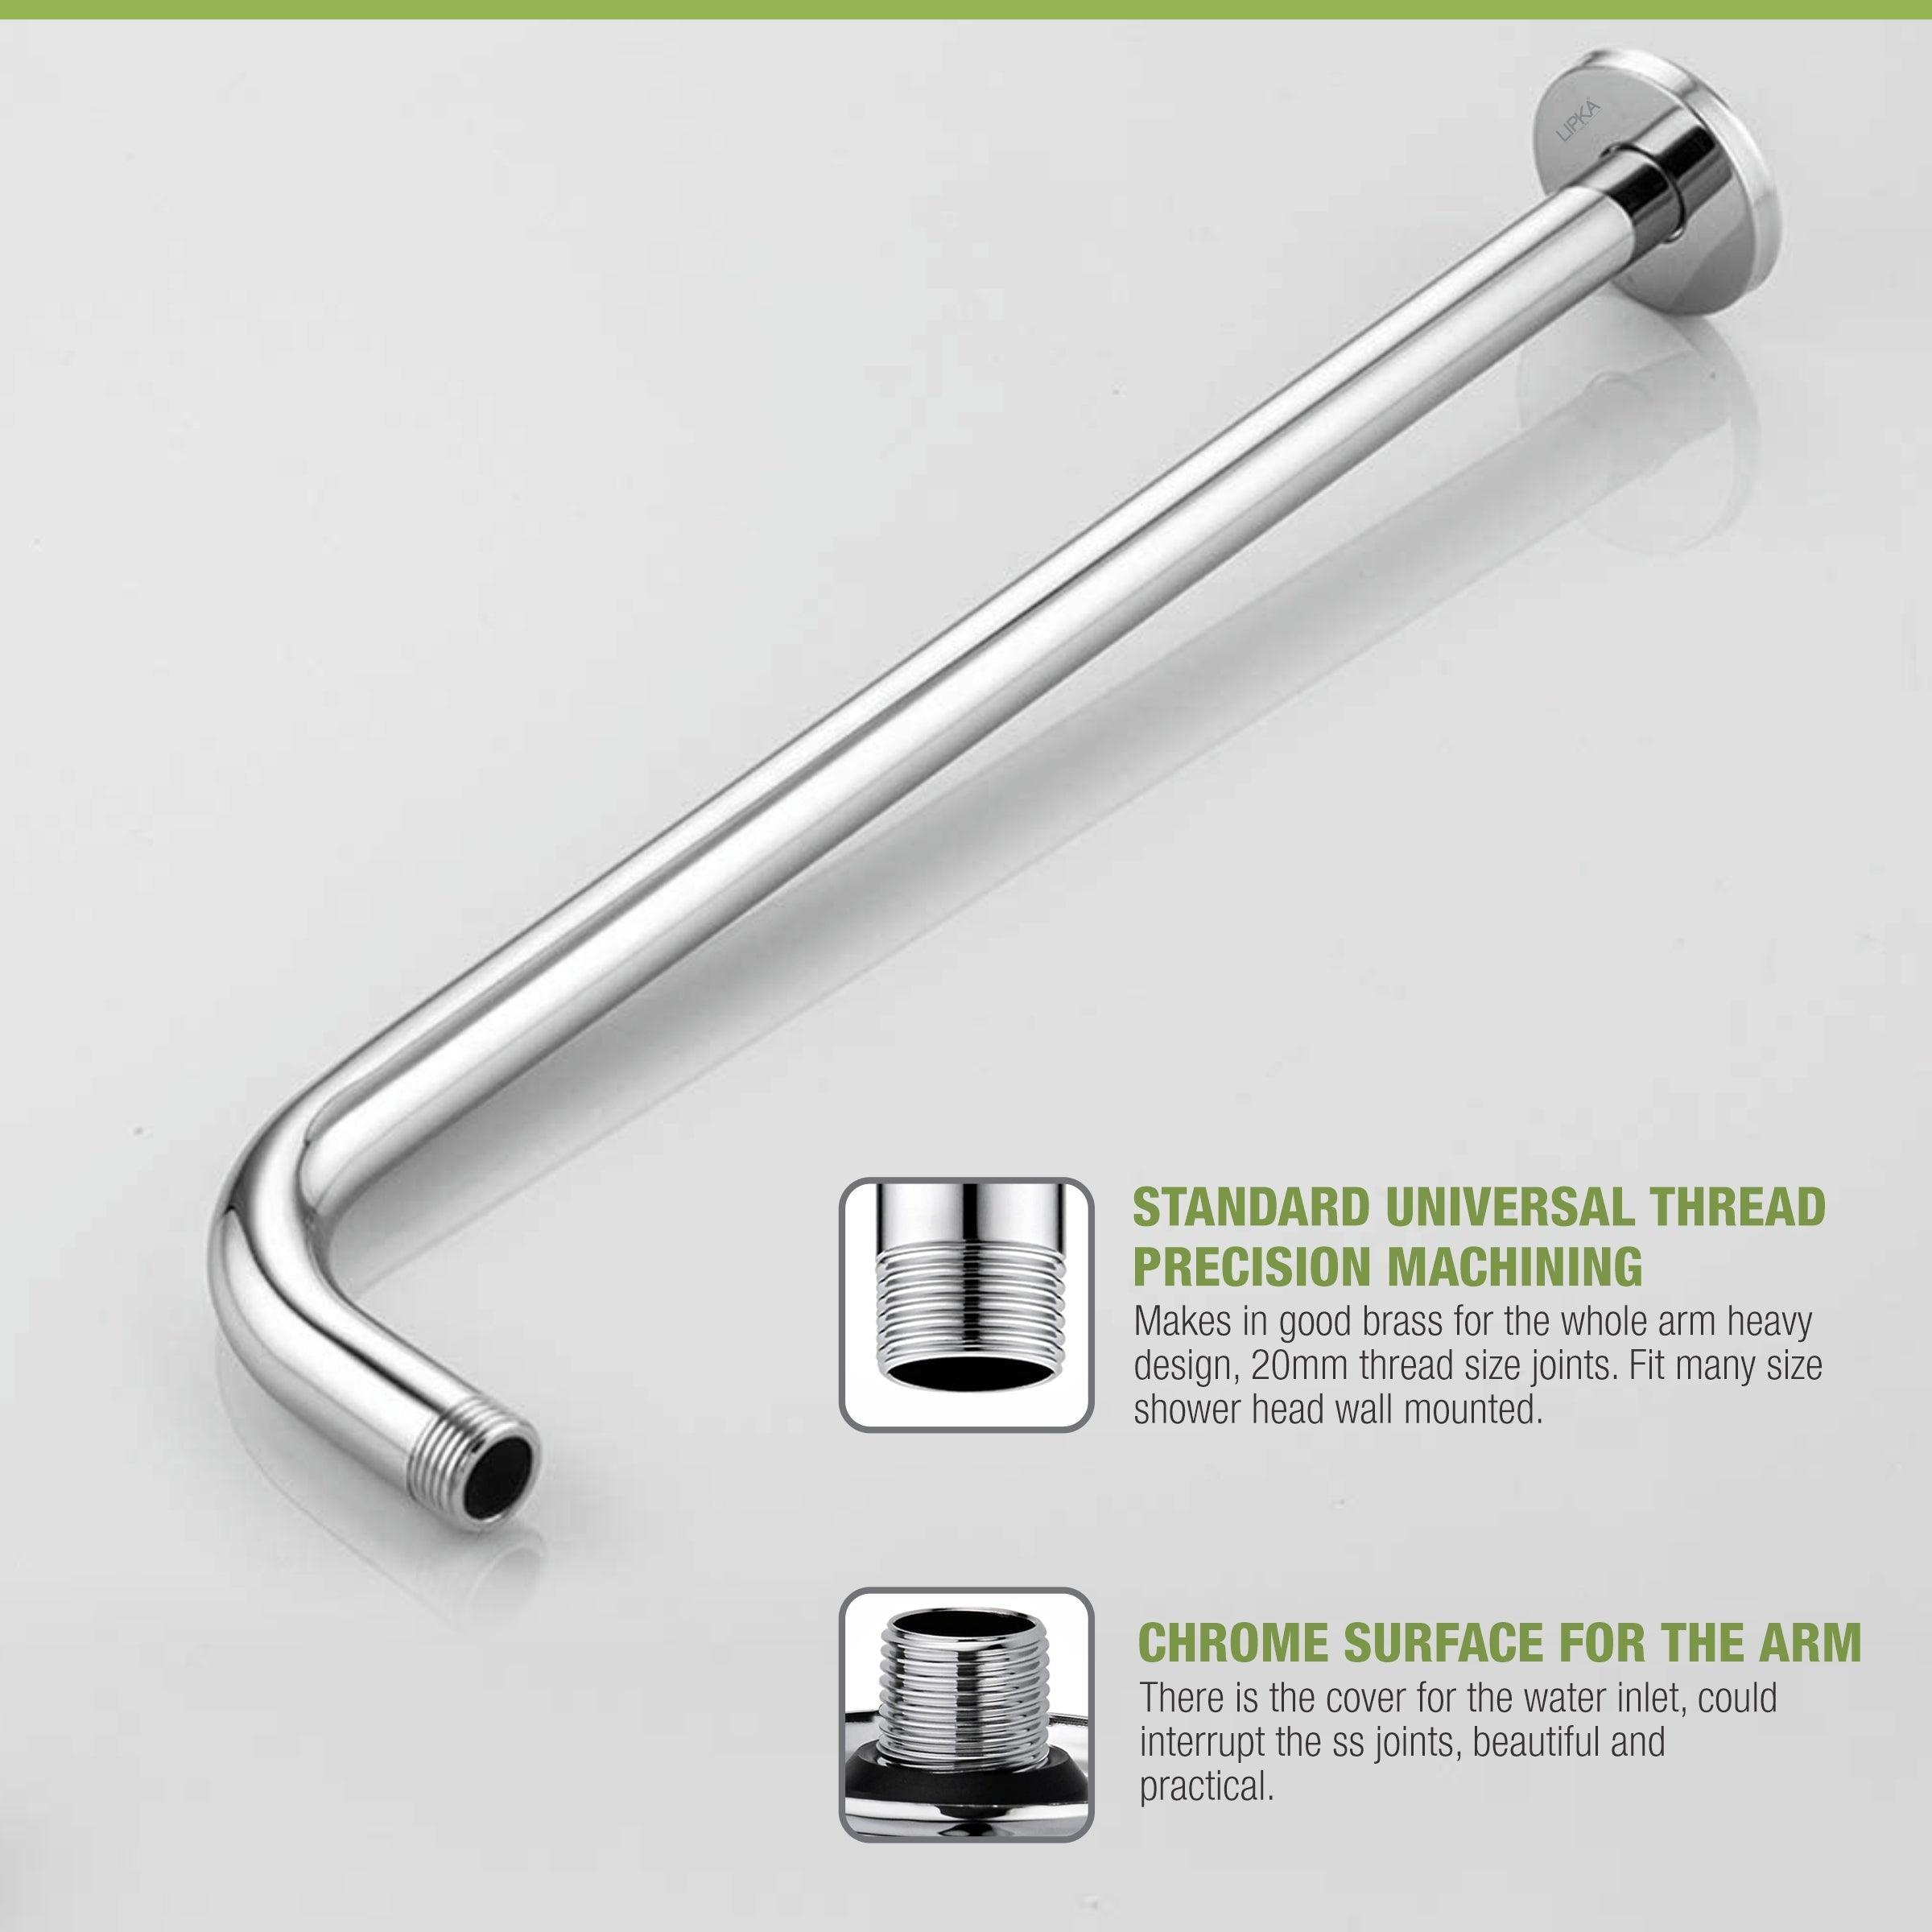 Full Bend Round Shower Arm (18 Inches) features